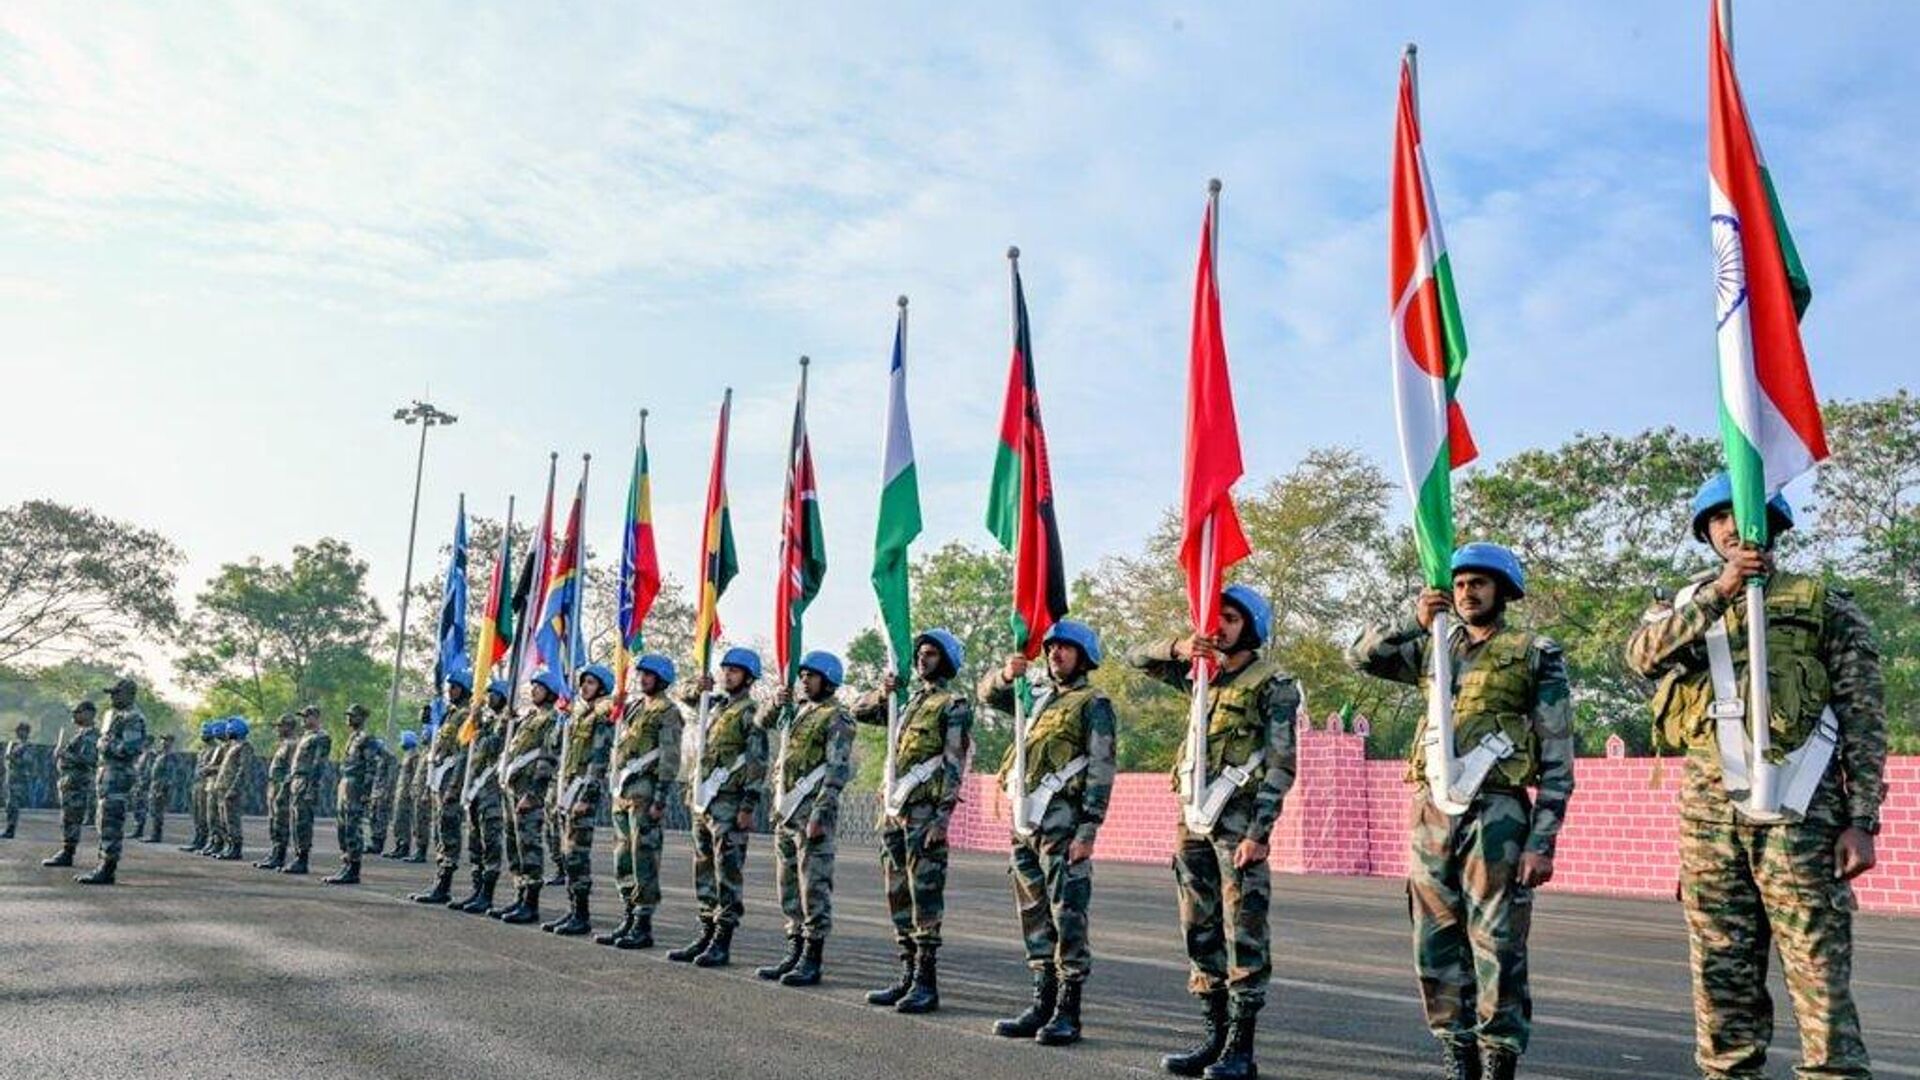 Africa-India Joint Military Exercise AFINDEX 2023 at Pune. The exercise is focused on Humanitarian Mine Action and Peace Keeping Operations under the UN mandate. - Sputnik India, 1920, 22.03.2023